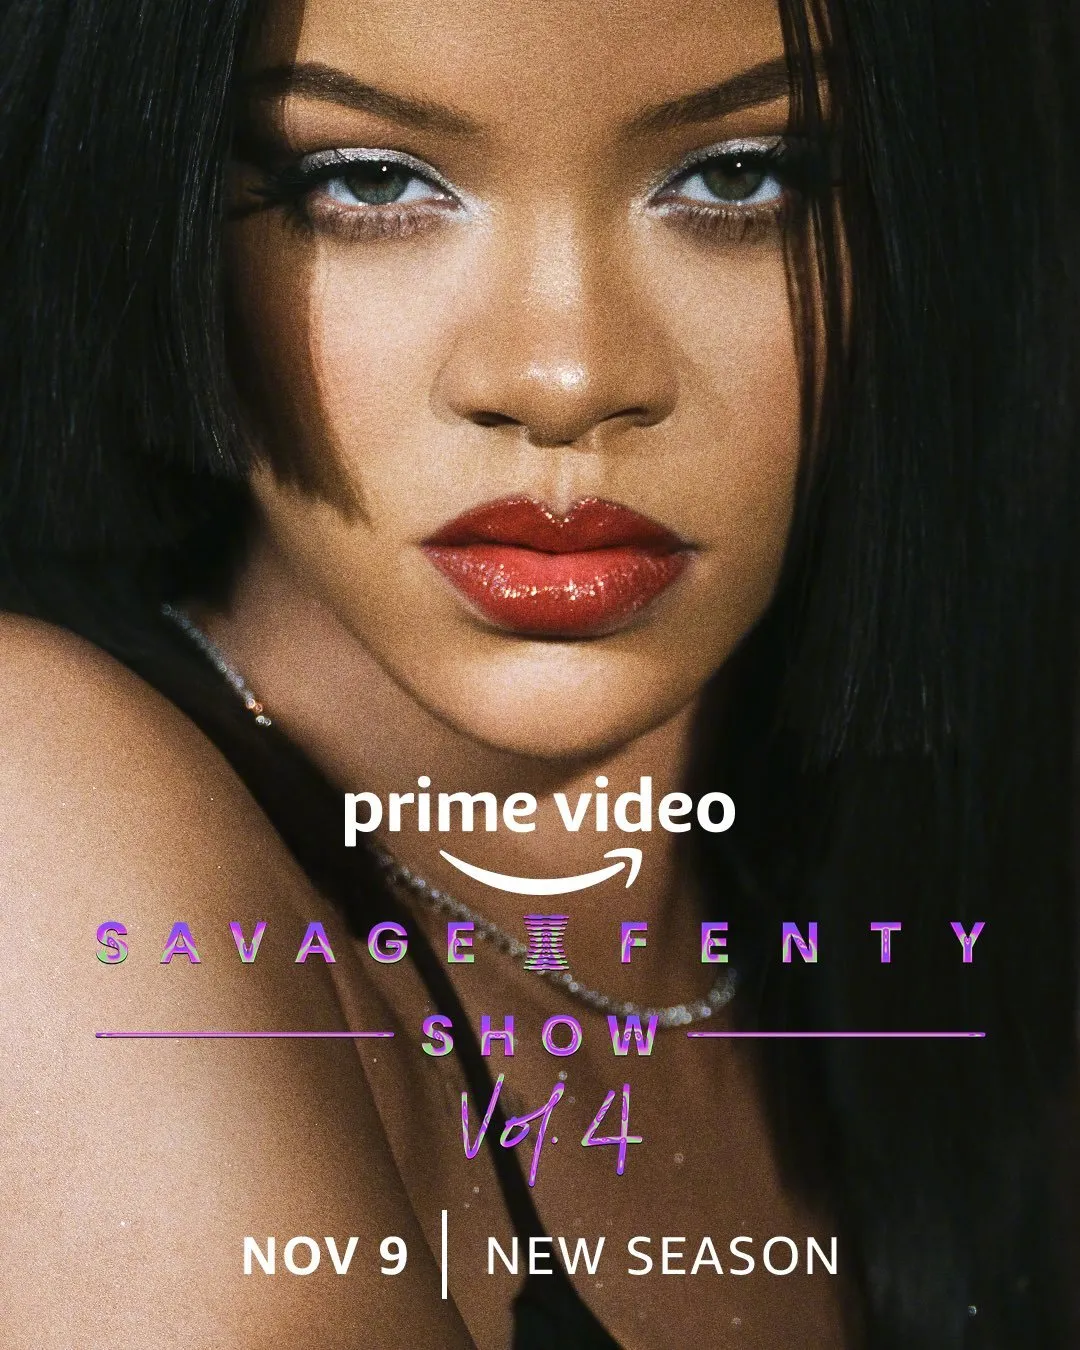 Amazon Releases Posters for Rihanna Lingerie Brand Show Special Program (Phase 4) | FMV6